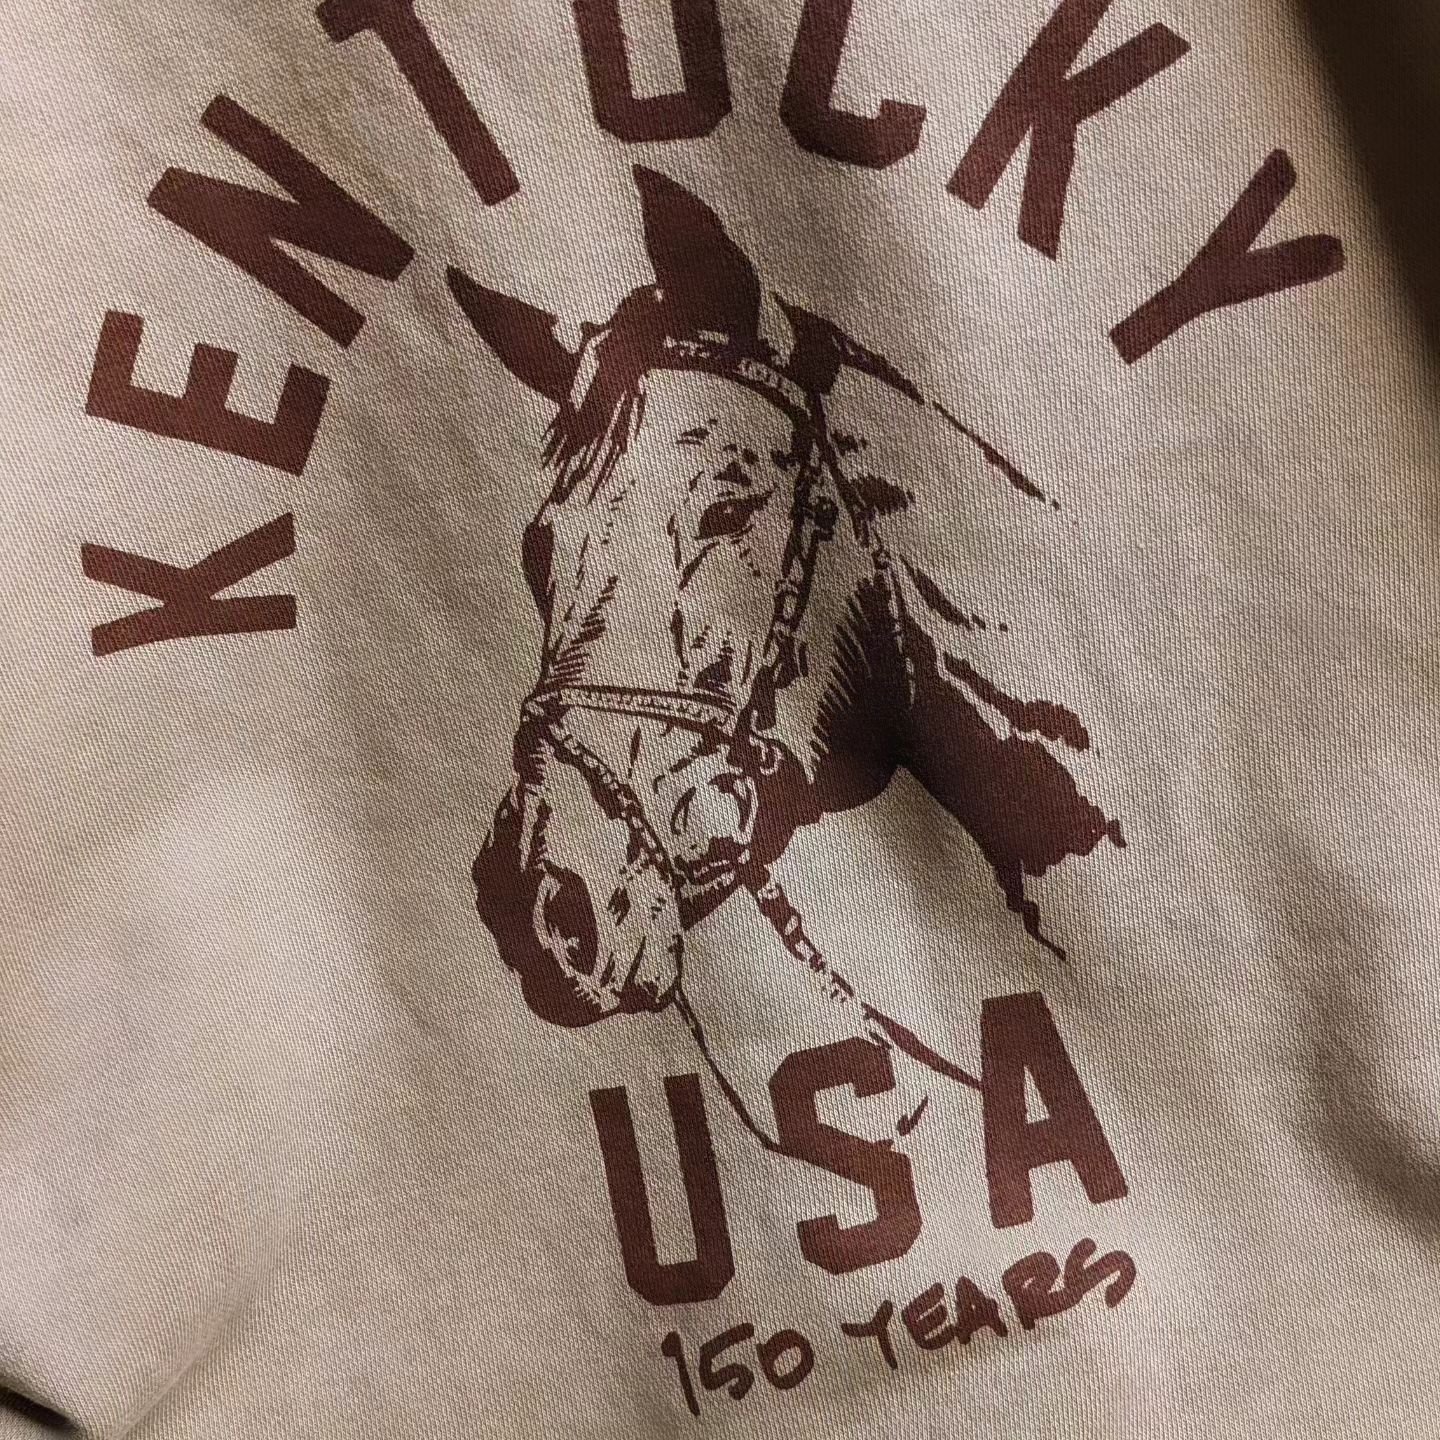 Still riding the high of that photo finish 150th Kentucky Derby? Today is the last day to grab a limited release &quot;150 Years&quot; hand-inked crew neck. Get it by midnight before it's gone!
.
.
.
#kyderby #kyderby150 #derby150 #runfortheroses #ke